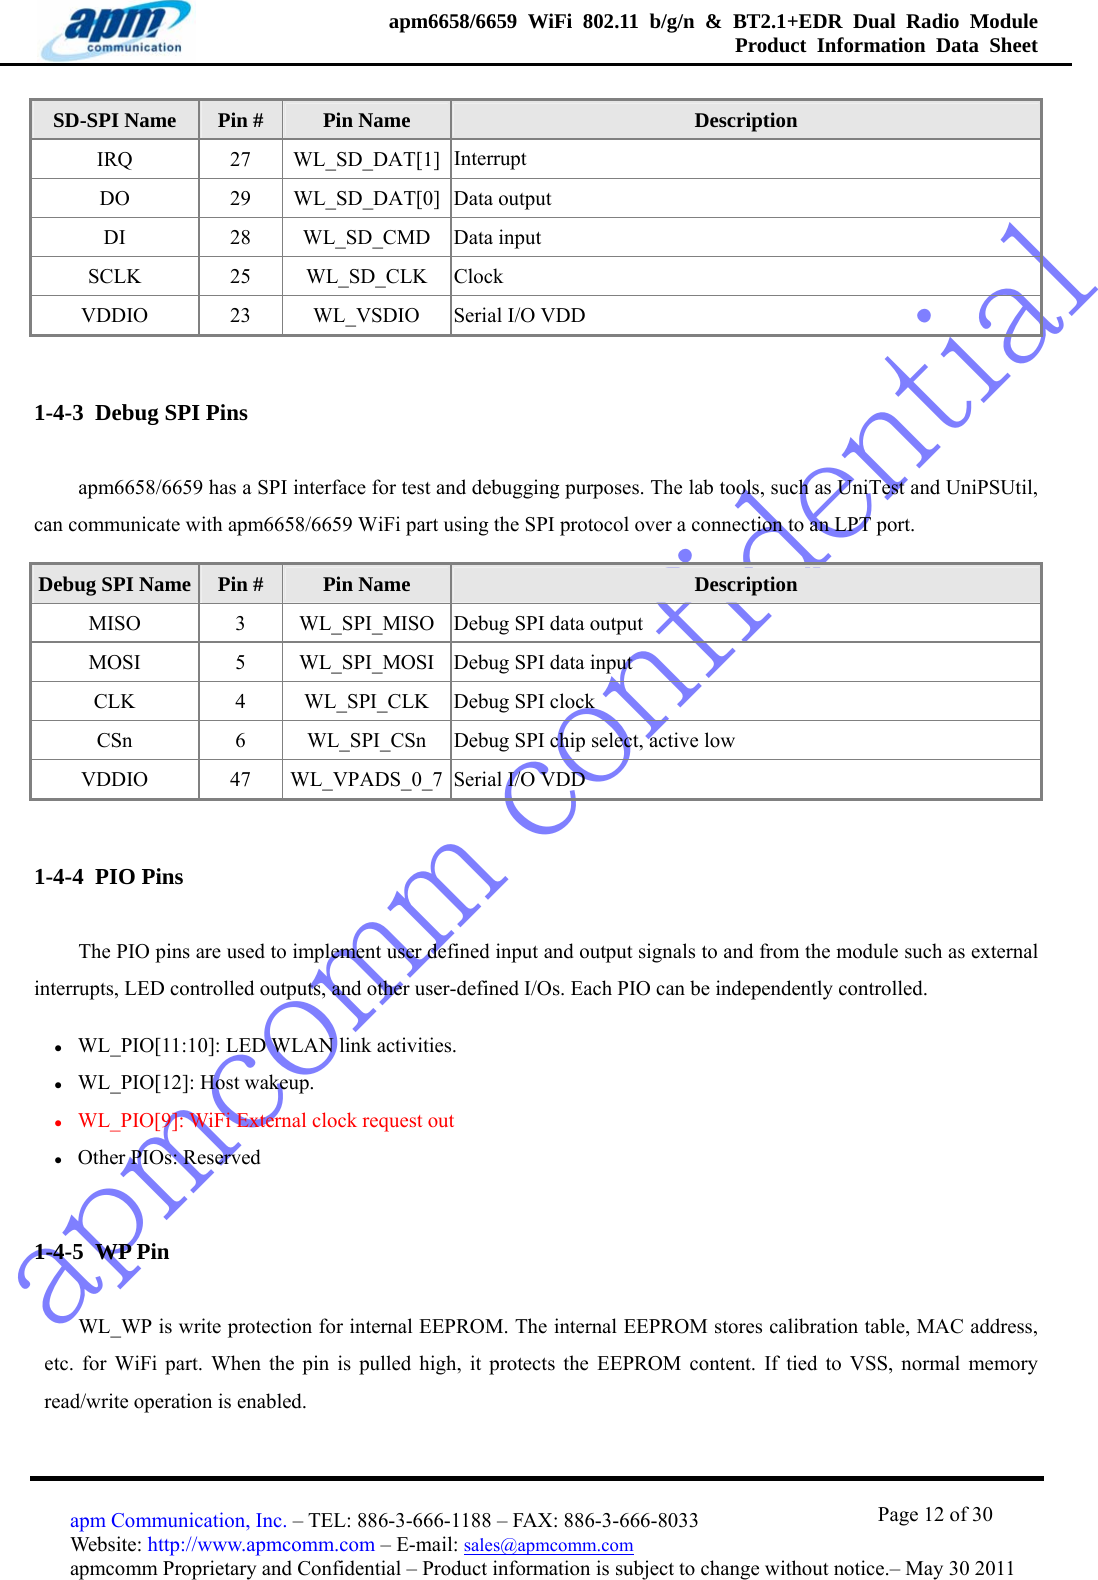 apmcomm confidentialapm6658/6659 WiFi 802.11 b/g/n &amp; BT2.1+EDR Dual Radio Module  Product Information Data Sheet                                       Page 12 of 30 apm Communication, Inc. – TEL: 886-3-666-1188 – FAX: 886-3-666-8033 Website: http://www.apmcomm.com – E-mail: sales@apmcomm.com  apmcomm Proprietary and Confidential – Product information is subject to change without notice.– May 30 2011 SD-SPI Name  Pin #  Pin Name  Description IRQ 27 WL_SD_DAT[1] Interrupt DO 29 WL_SD_DAT[0] Data output DI 28 WL_SD_CMD Data input SCLK 25 WL_SD_CLK Clock VDDIO  23  WL_VSDIO  Serial I/O VDD 1-4-3  Debug SPI Pins apm6658/6659 has a SPI interface for test and debugging purposes. The lab tools, such as UniTest and UniPSUtil, can communicate with apm6658/6659 WiFi part using the SPI protocol over a connection to an LPT port. Debug SPI Name  Pin #  Pin Name  Description MISO 3 WL_SPI_MISO Debug SPI data output MOSI 5 WL_SPI_MOSI Debug SPI data input CLK 4 WL_SPI_CLK Debug SPI clock CSn 6 WL_SPI_CSn Debug SPI chip select, active low VDDIO  47  WL_VPADS_0_7 Serial I/O VDD 1-4-4  PIO Pins The PIO pins are used to implement user defined input and output signals to and from the module such as external interrupts, LED controlled outputs, and other user-defined I/Os. Each PIO can be independently controlled. z WL_PIO[11:10]: LED WLAN link activities. z WL_PIO[12]: Host wakeup. z WL_PIO[9]: WiFi External clock request out z Other PIOs: Reserved 1-4-5  WP Pin WL_WP is write protection for internal EEPROM. The internal EEPROM stores calibration table, MAC address, etc. for WiFi part. When the pin is pulled high, it protects the EEPROM content. If tied to VSS, normal memory read/write operation is enabled.   